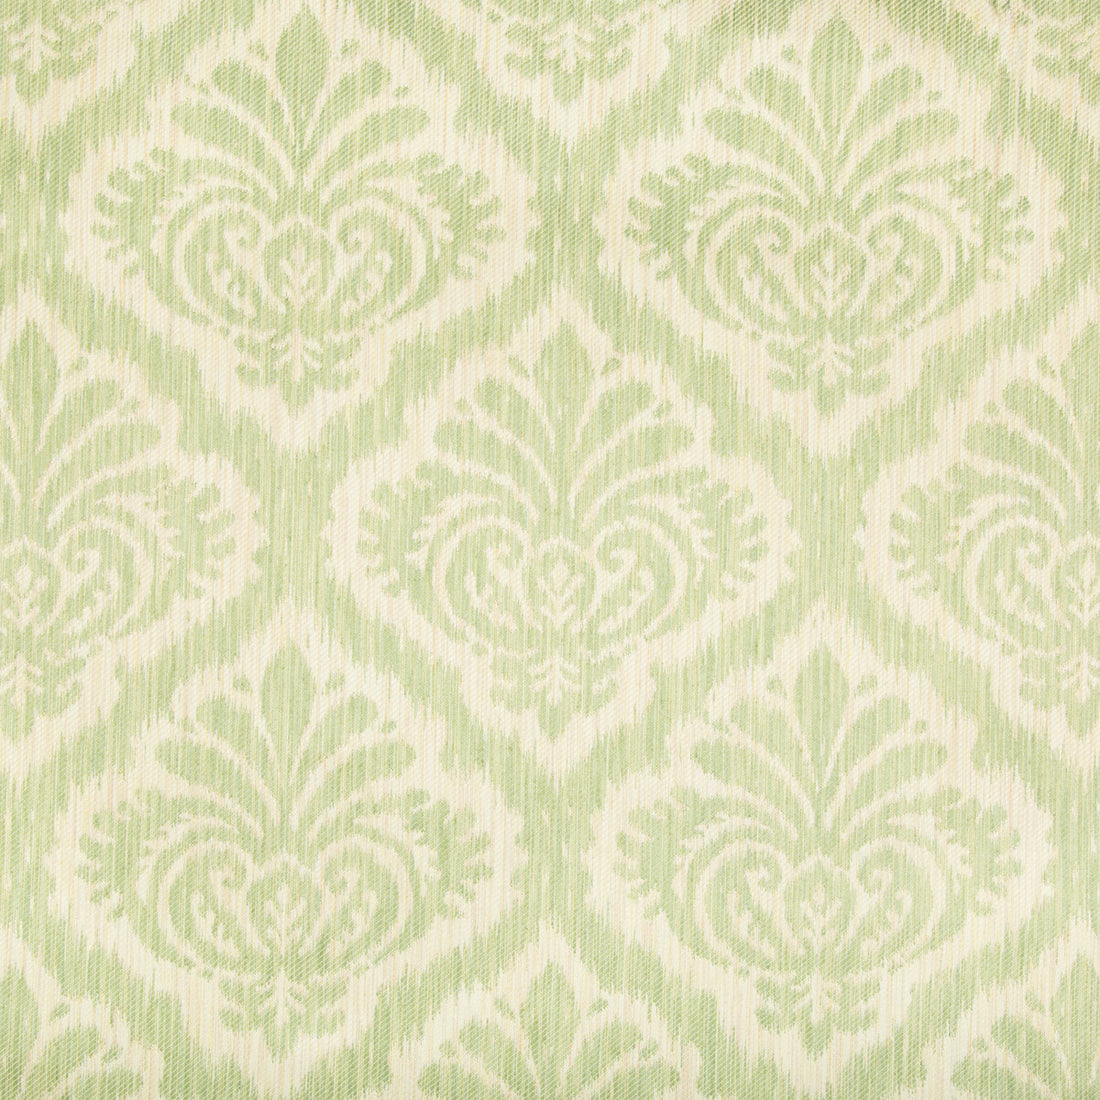 Durbar Tait Strie II fabric in celery color - pattern 8017137.3.0 - by Brunschwig &amp; Fils in the Baronet collection